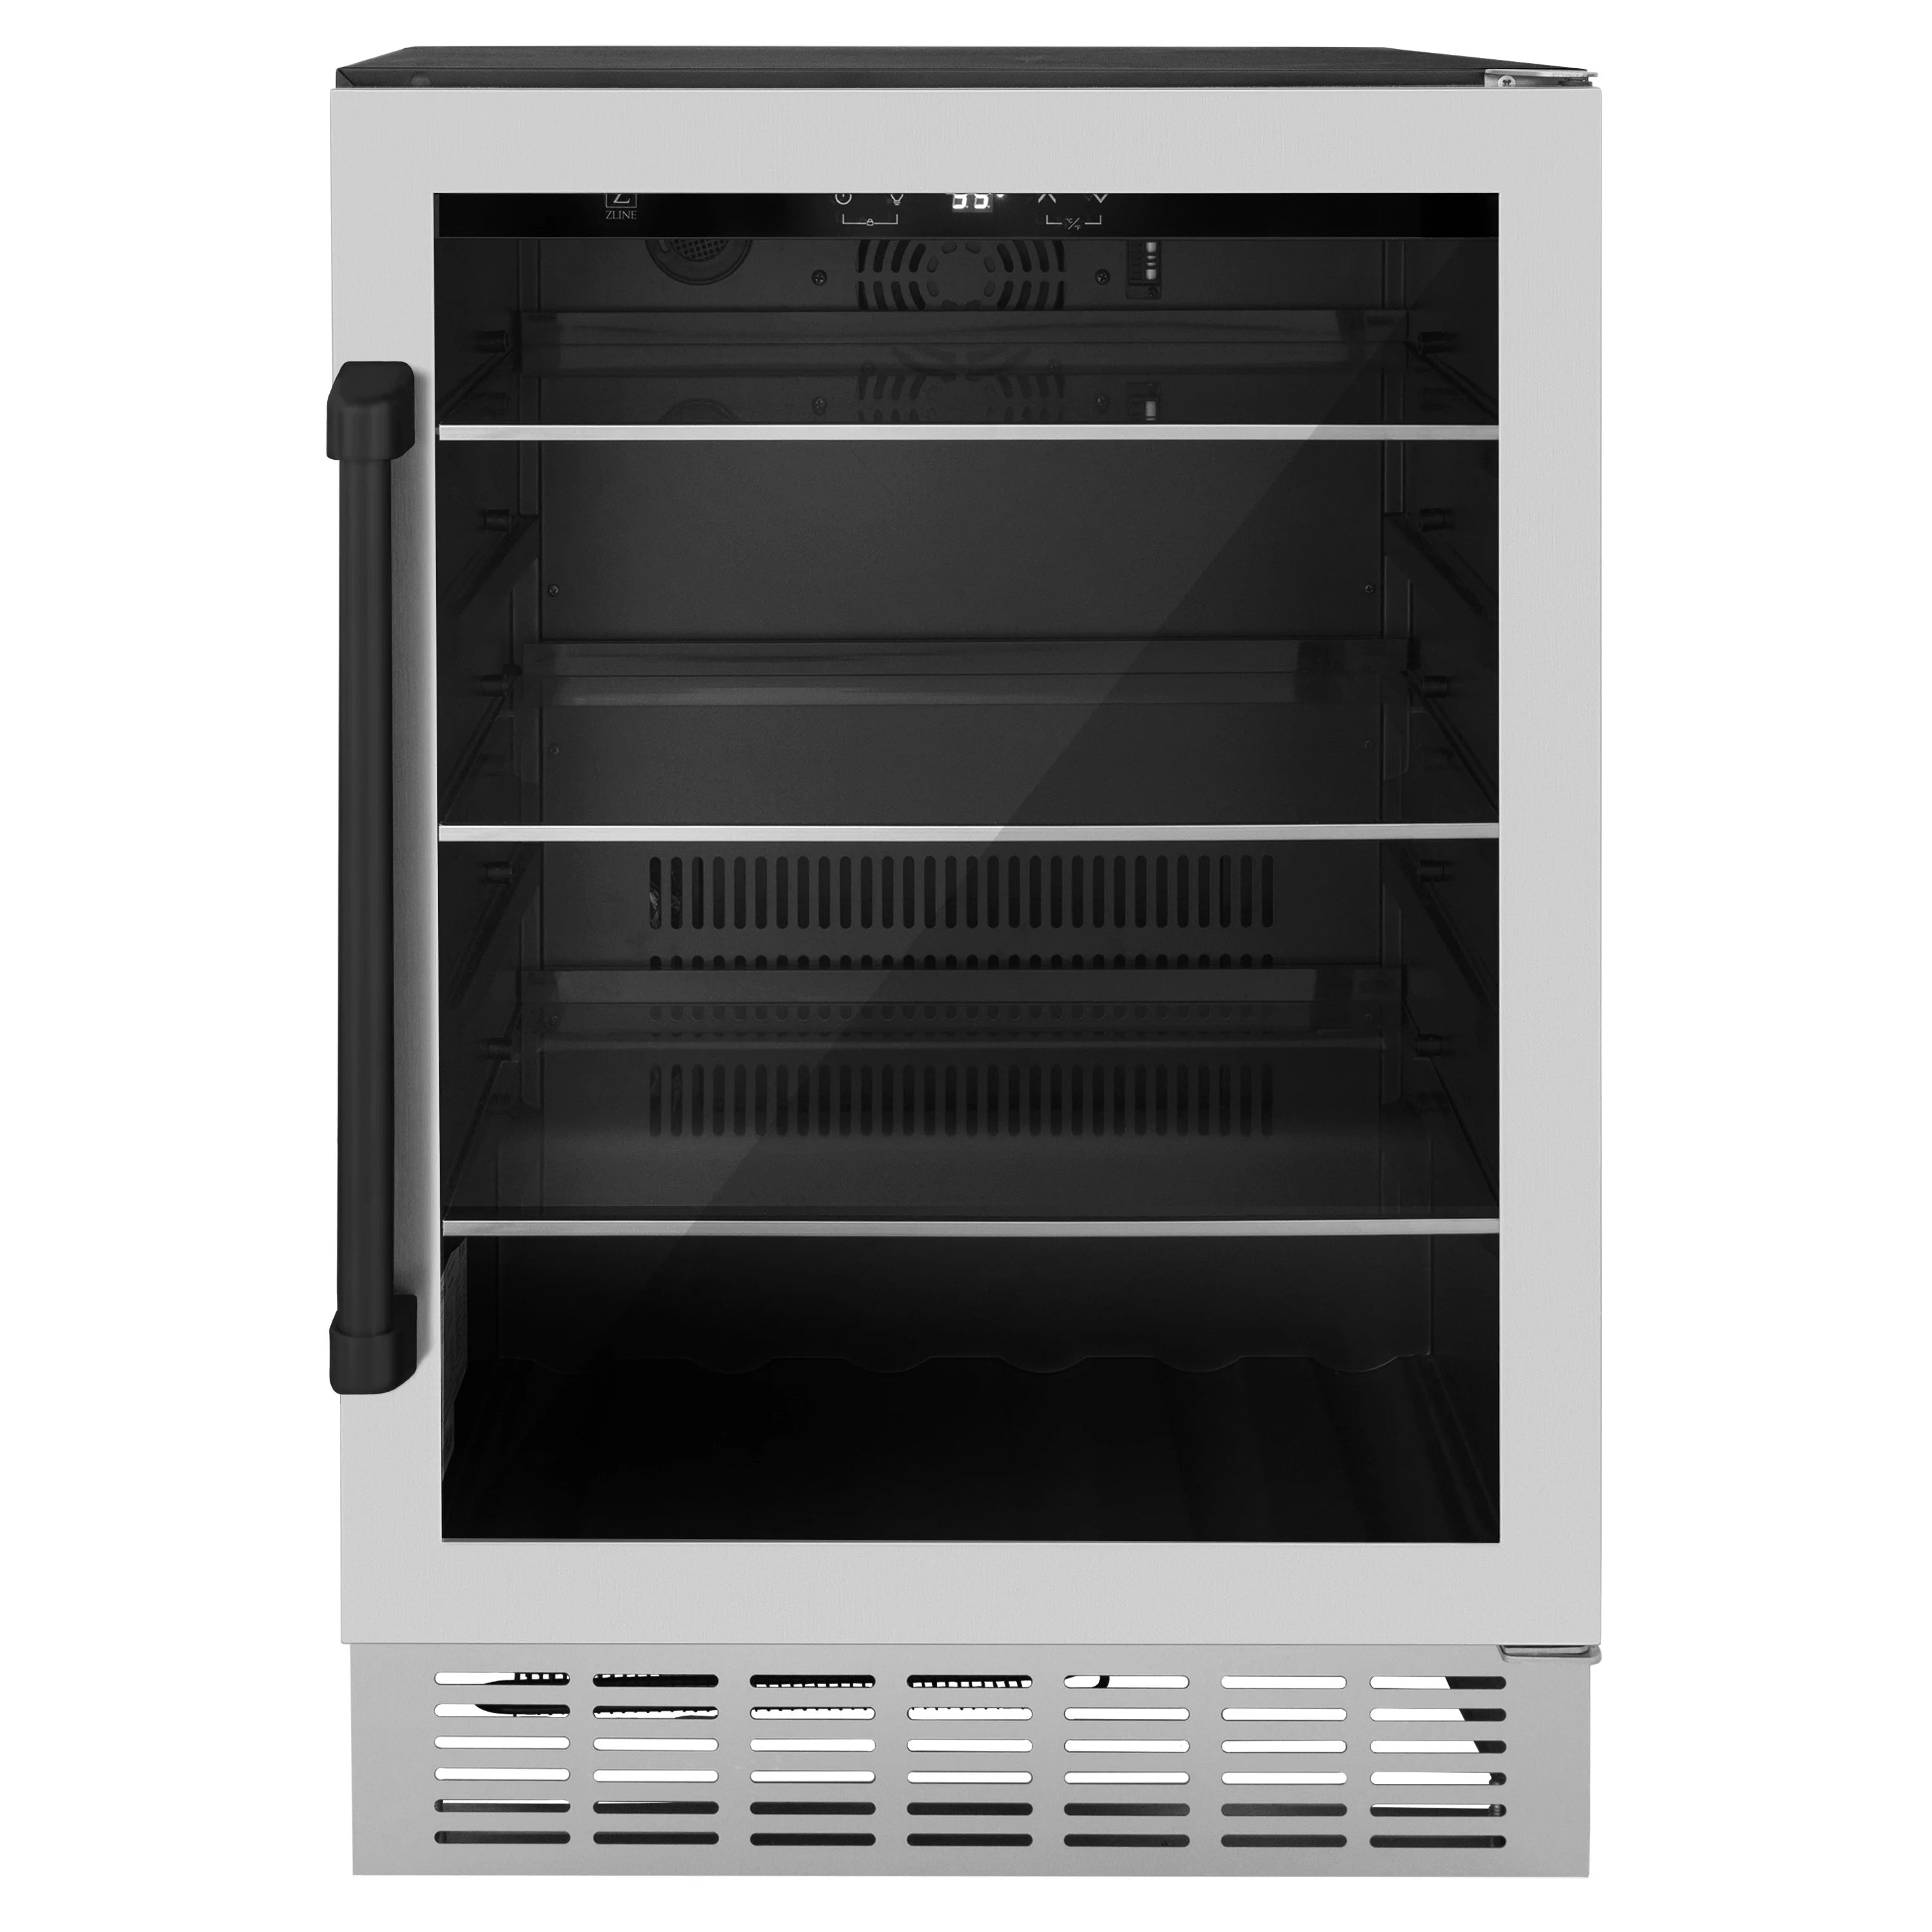 ZLINE 24" Monument 154 Can Beverage Fridge In Stainless Steel with Accents - RBV-US-24